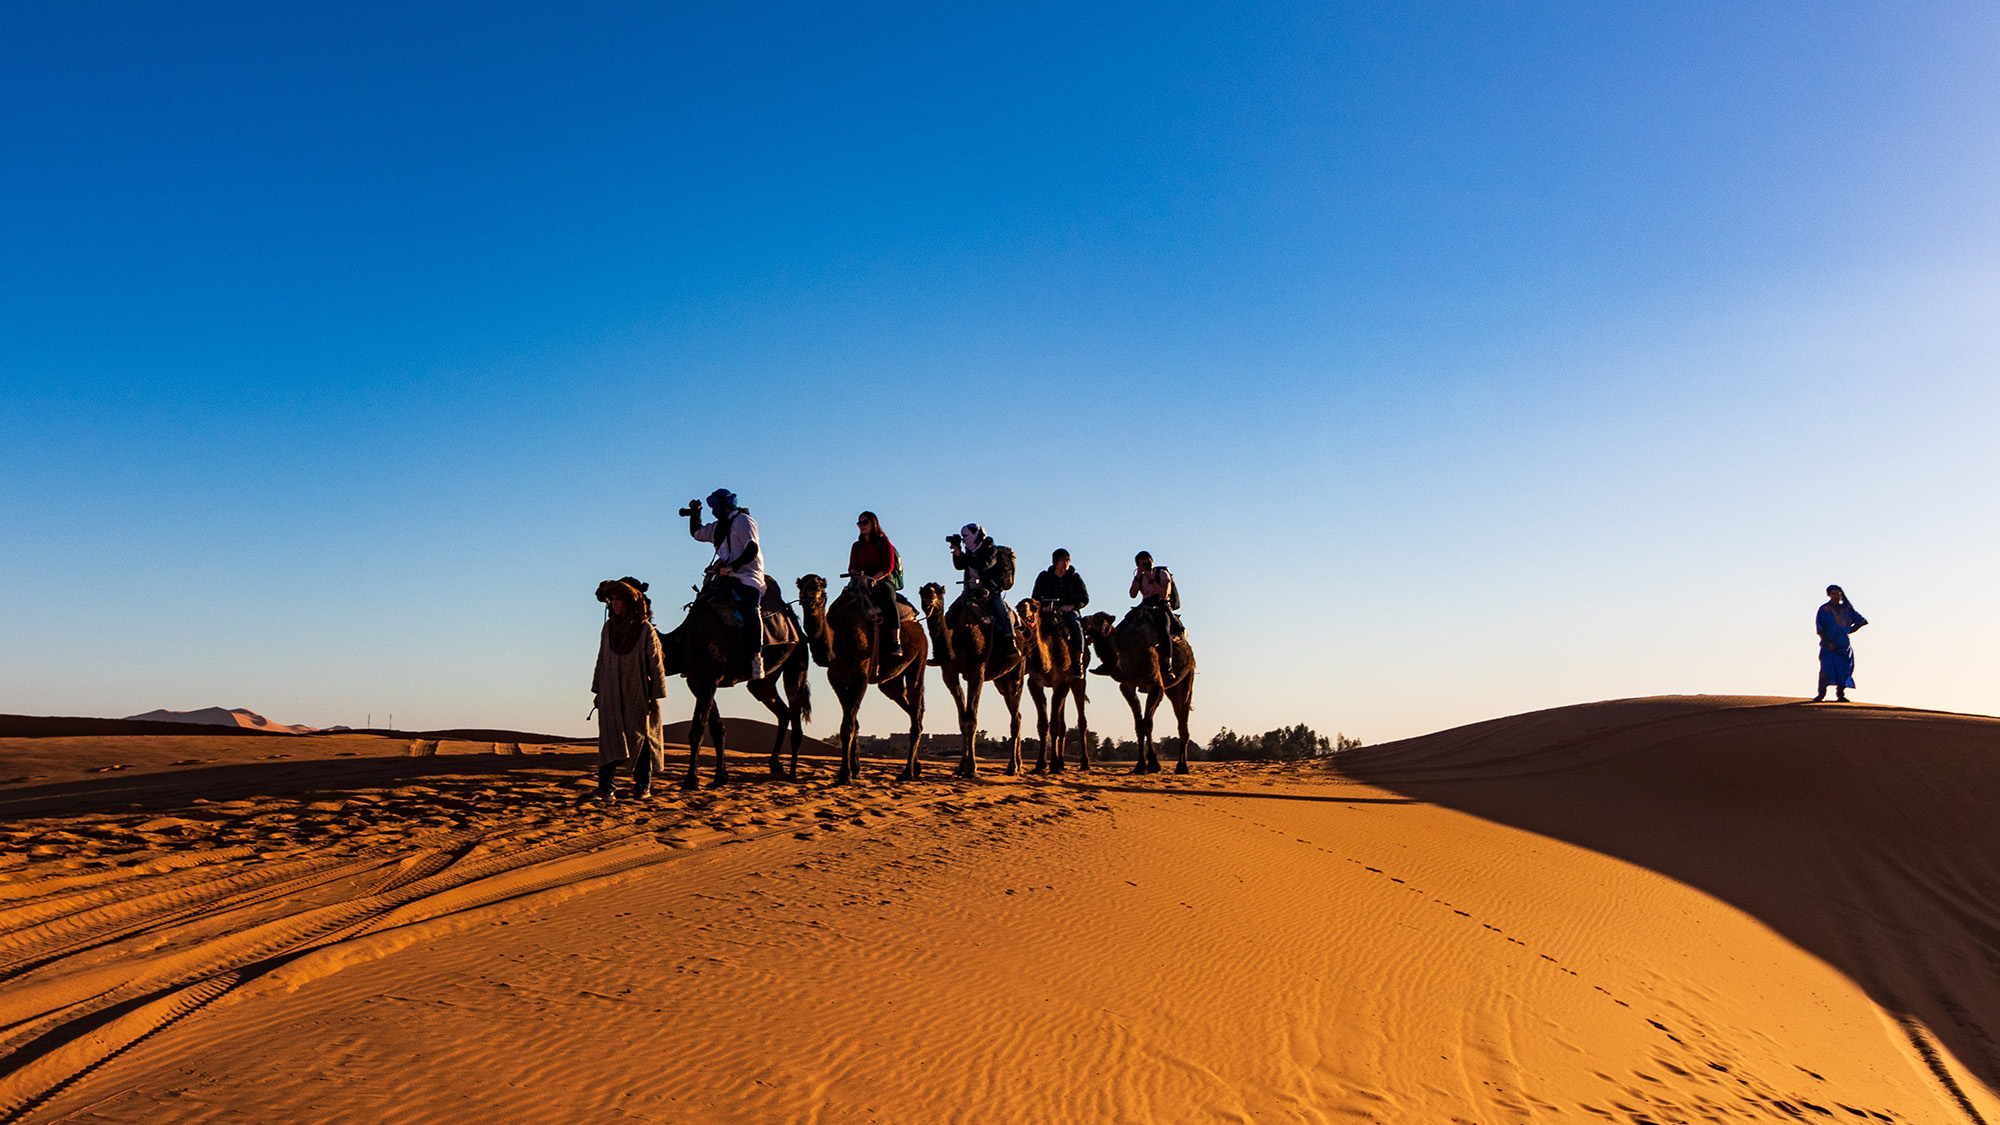 People riding camels in the desert